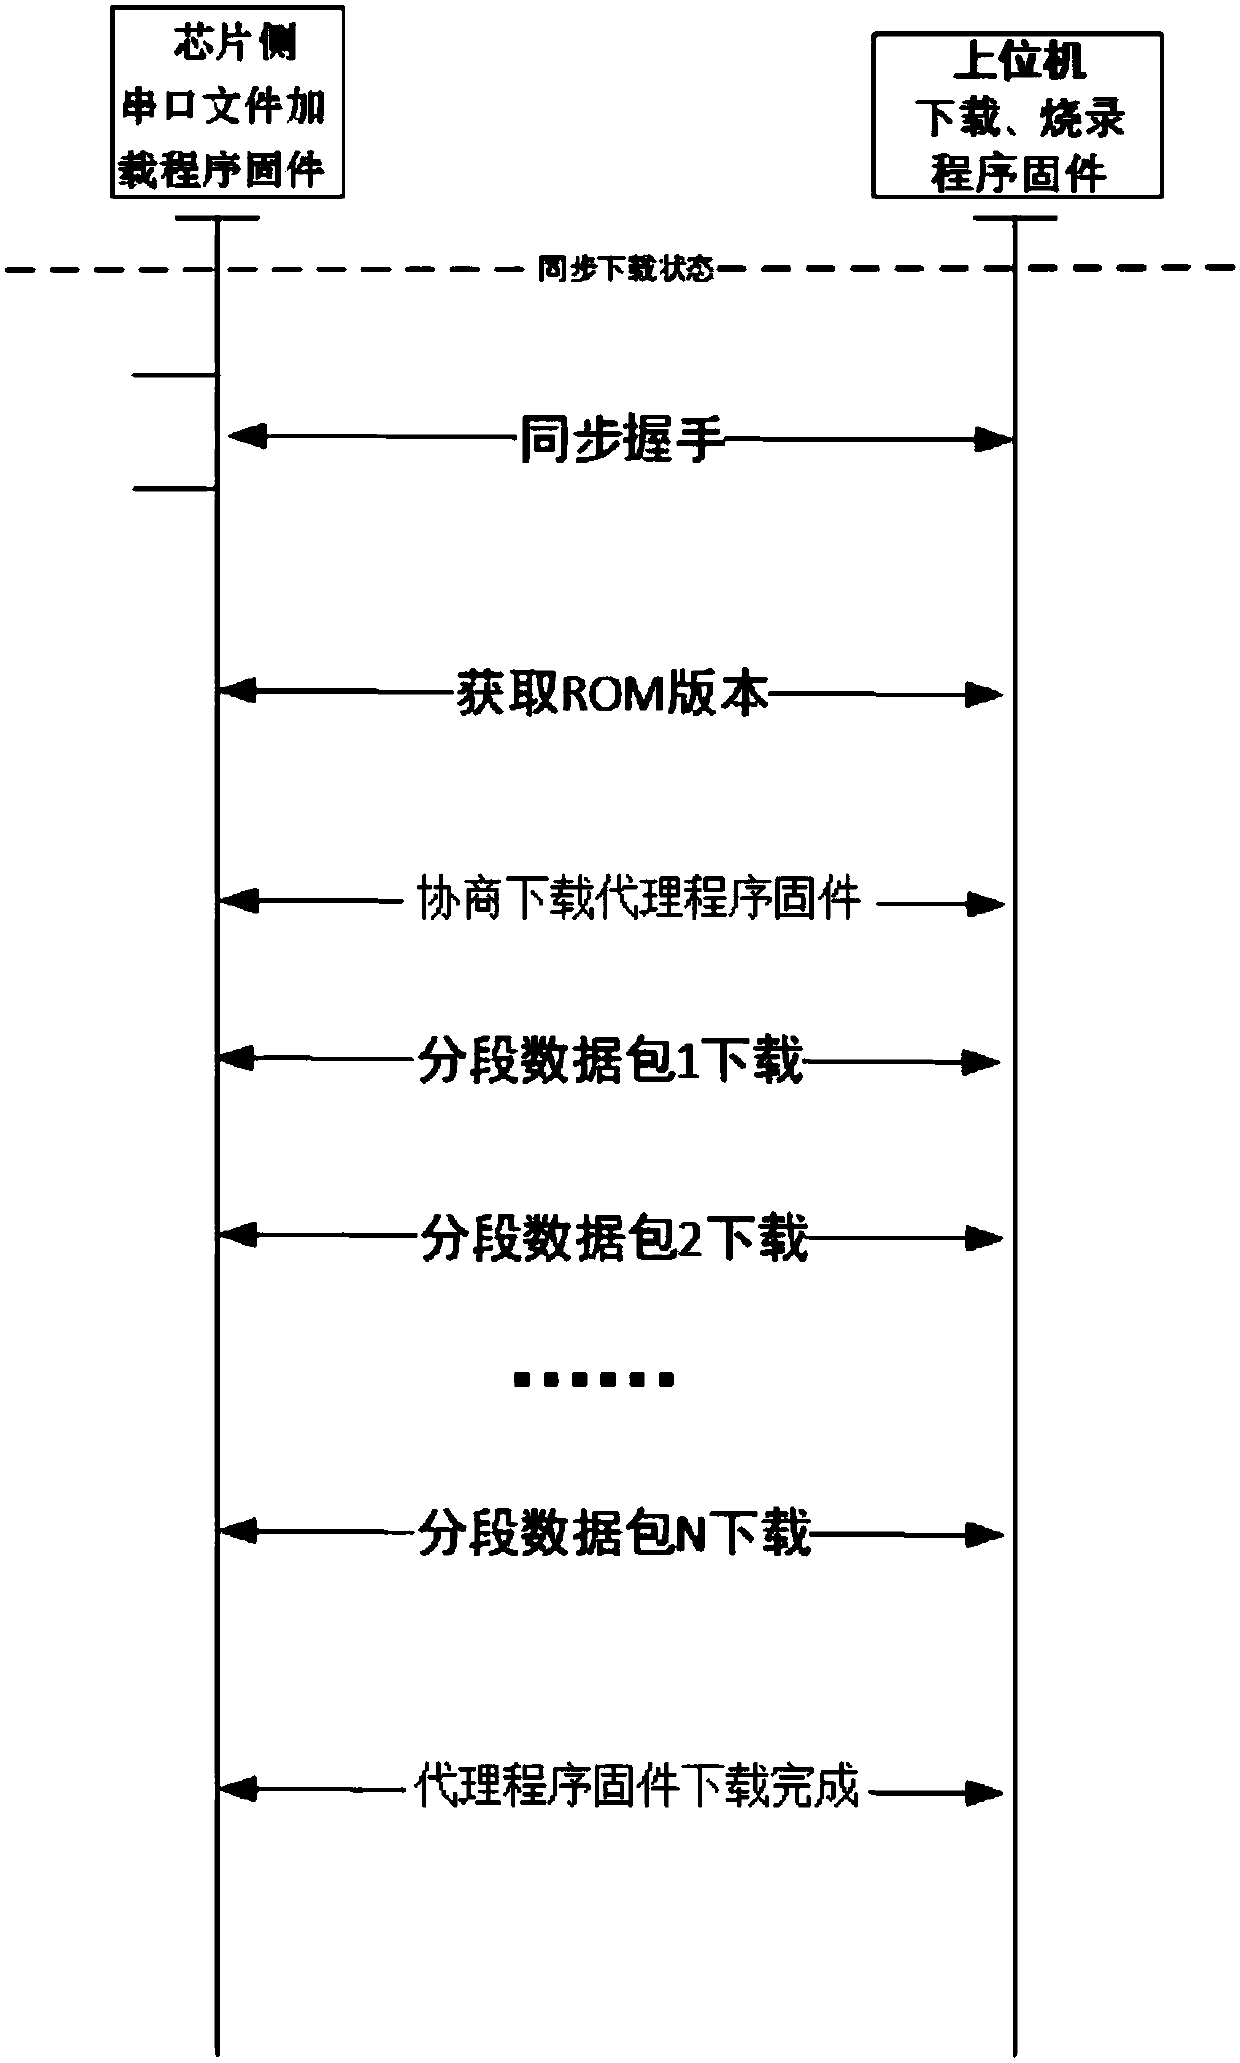 A serial port loading device and method for an embedded chip